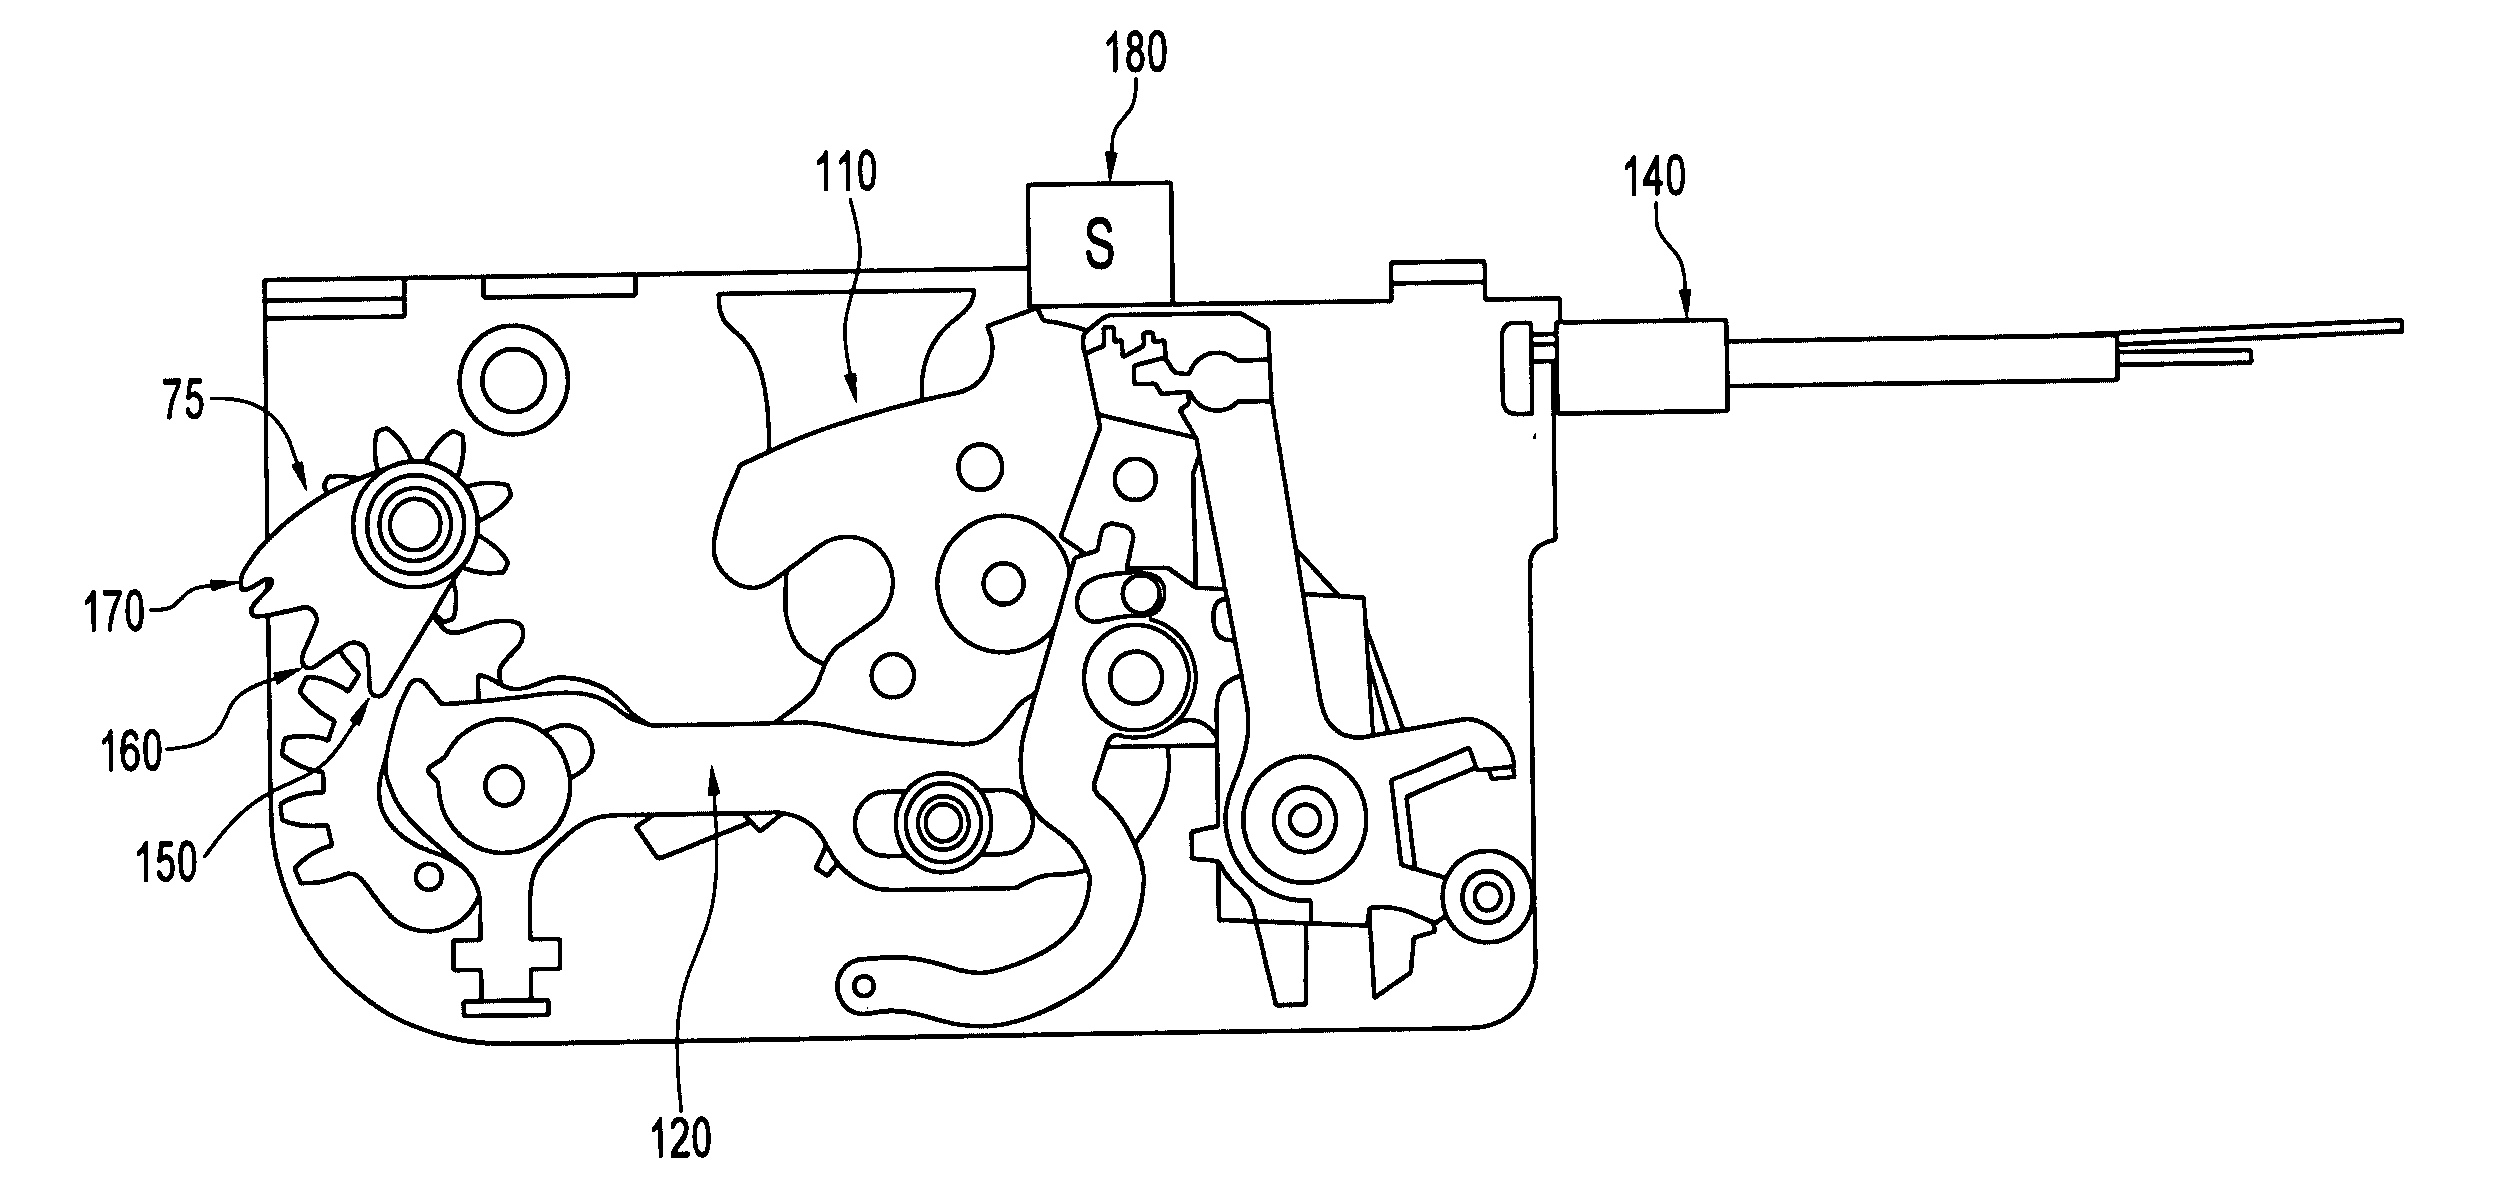 System and method for registering the drive mechanism position of a latch apparatus after power loss